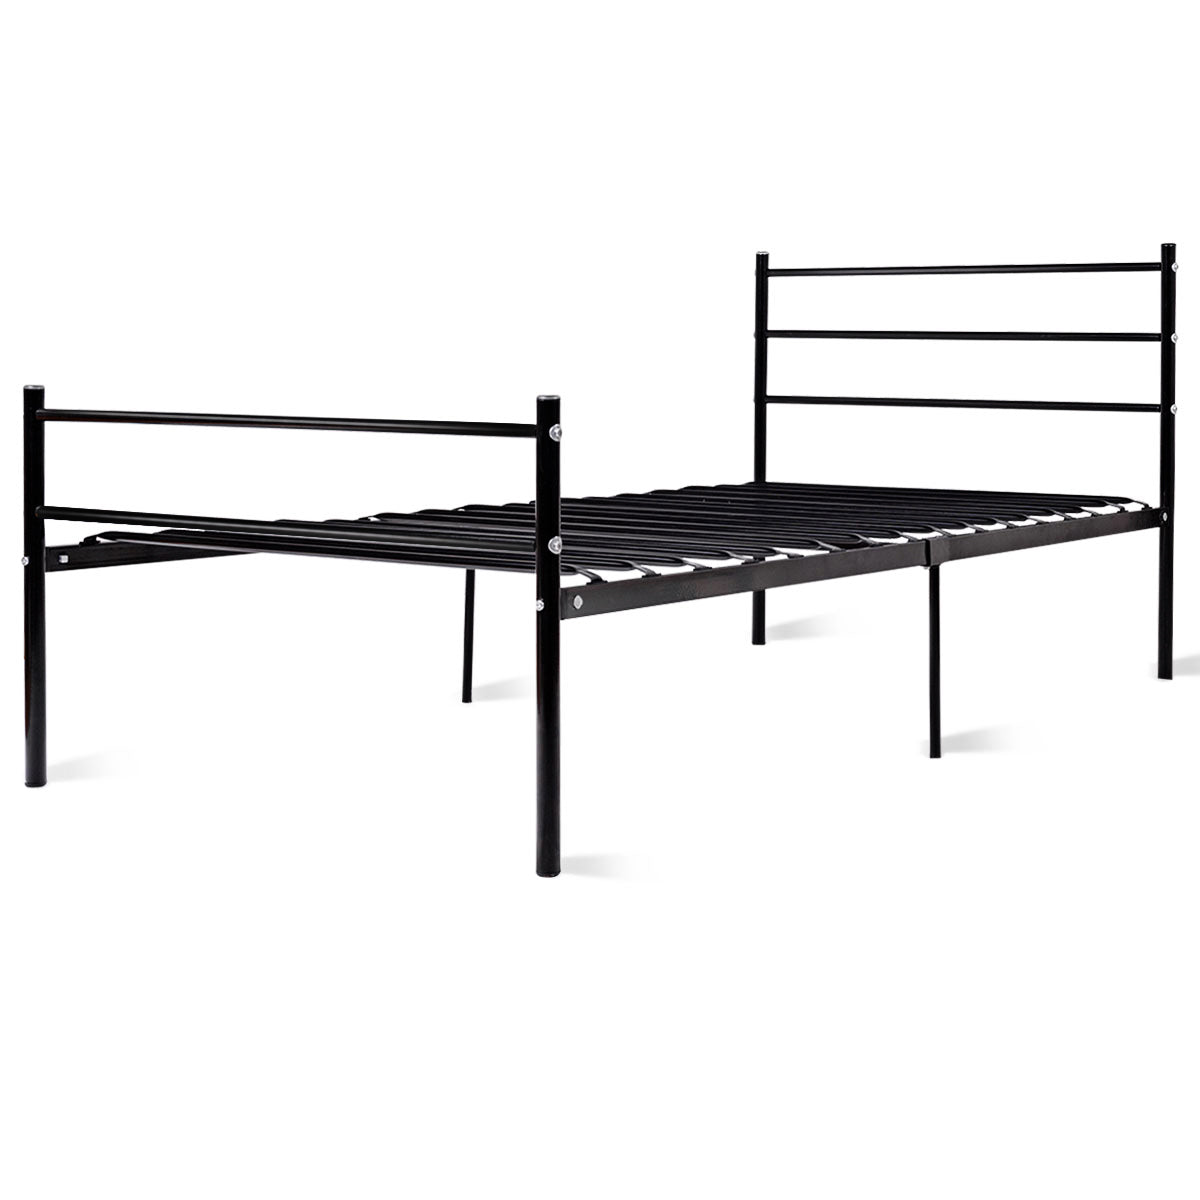 Giantex Platform Bed with Headboard and Footboard